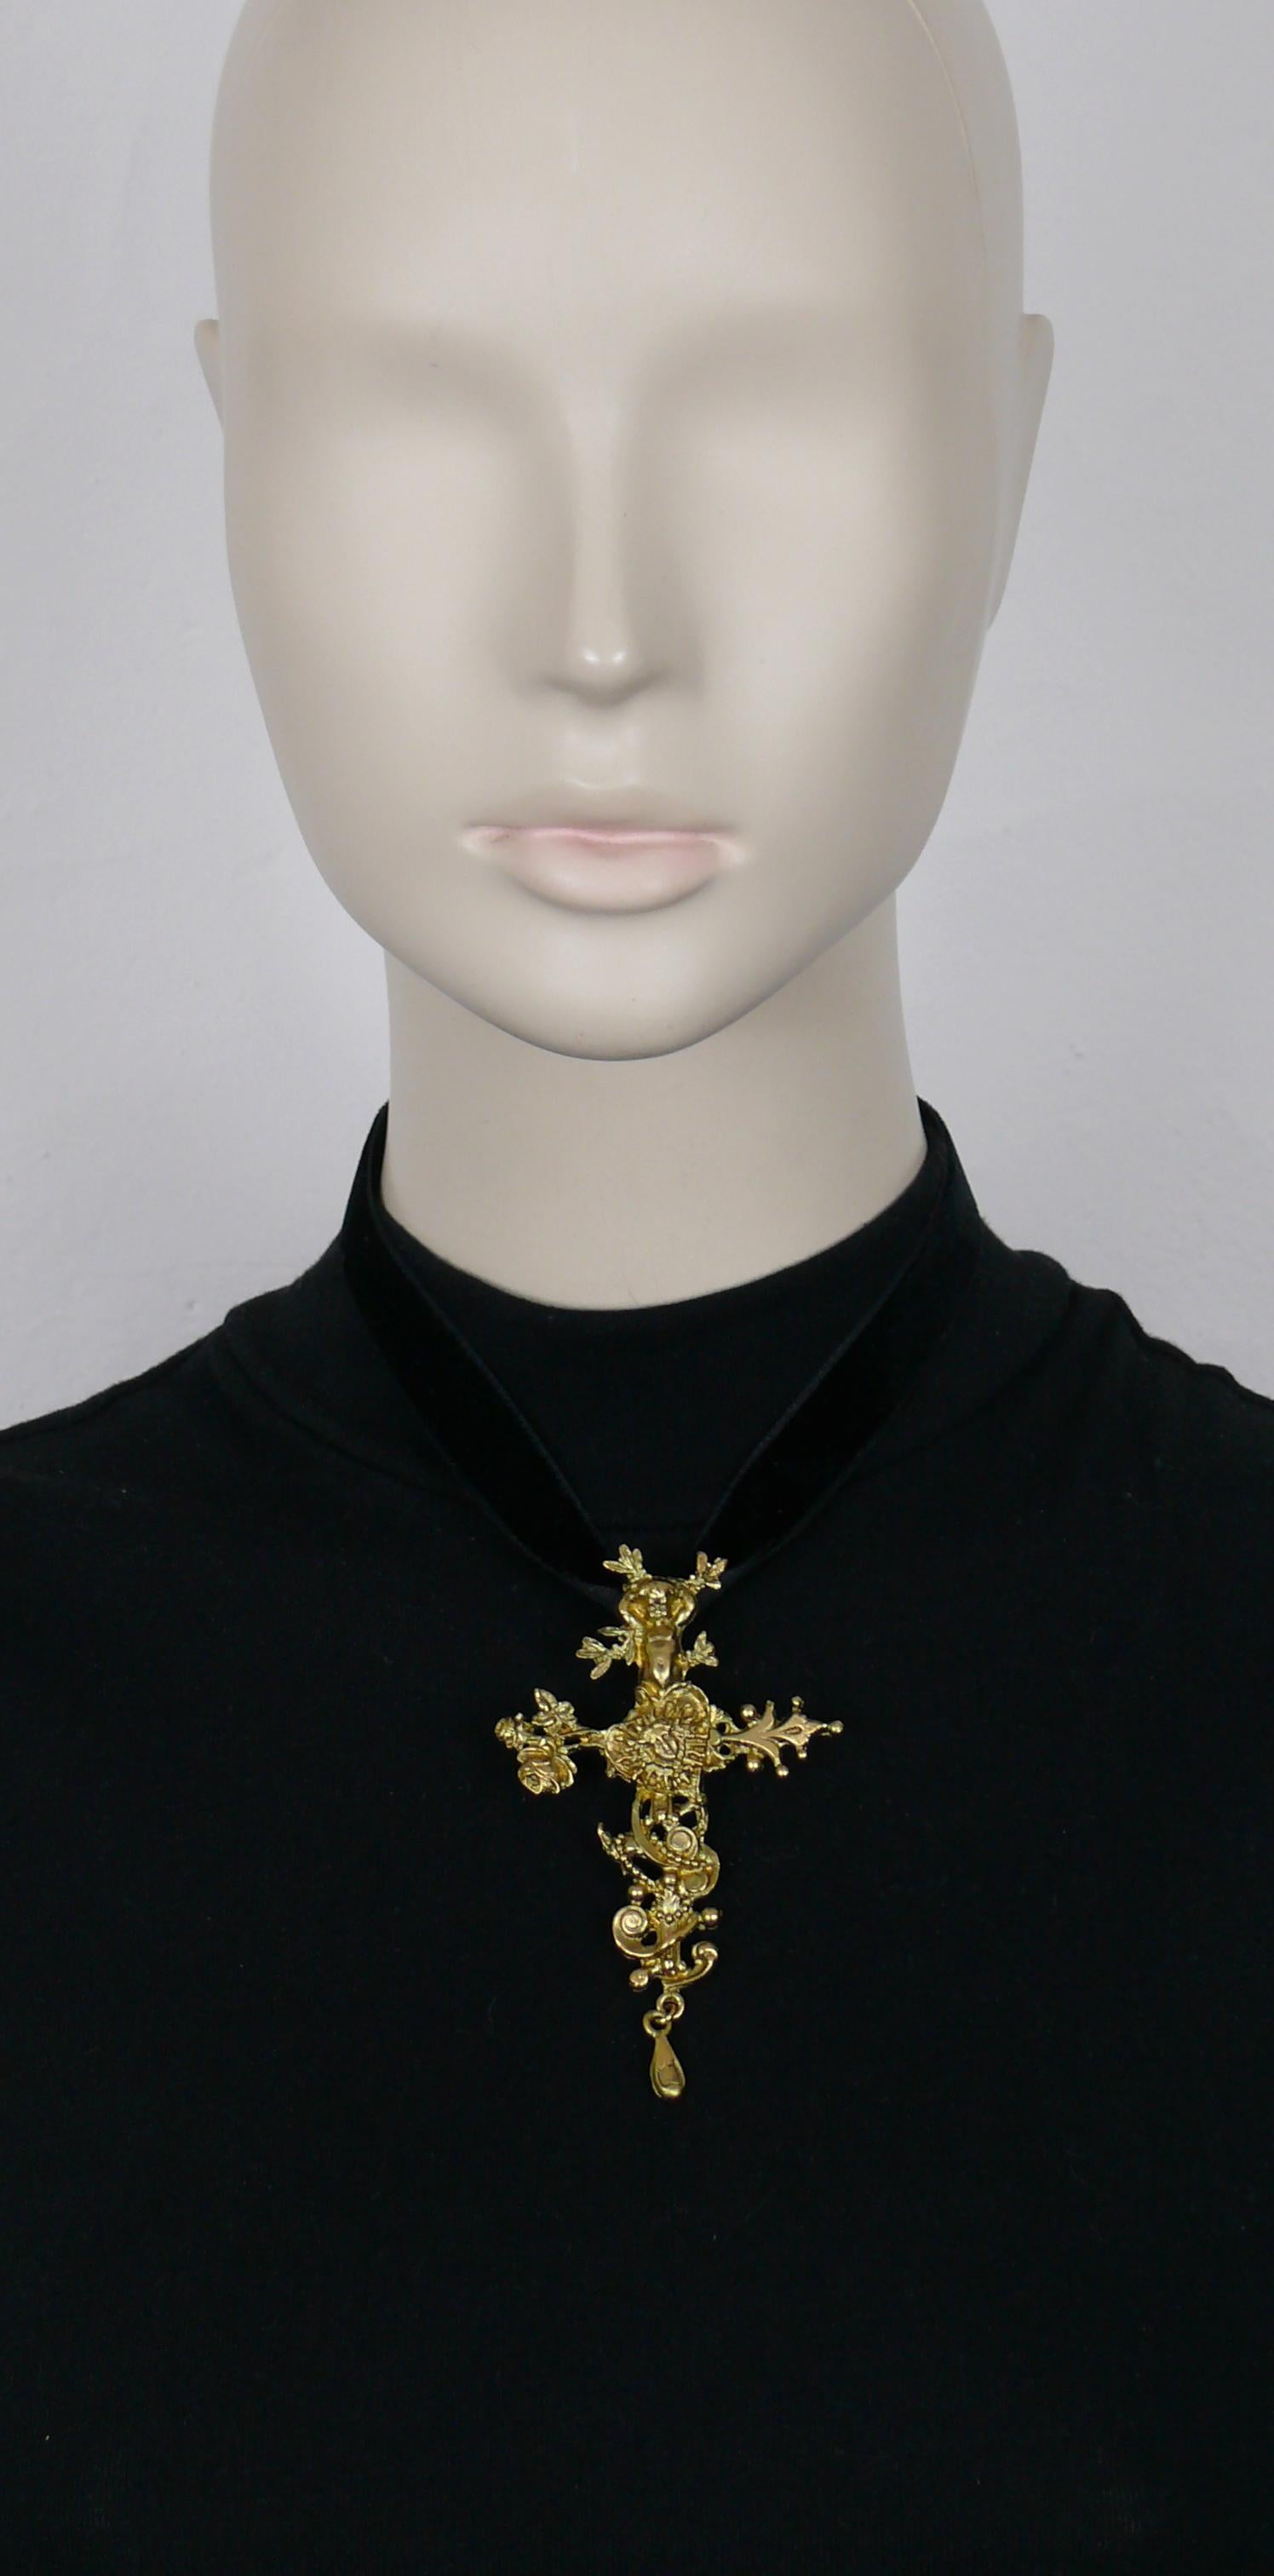 CHRISTIAN LACROIX vintage matte gold tone pendant necklace featuring in a detailed setting a putto, a heart and the allegorical portrait of King Louis XIV founder of the Comedie Francaise.

Black velvet ribbon ties at the neck.

Marked CHRISTIAN